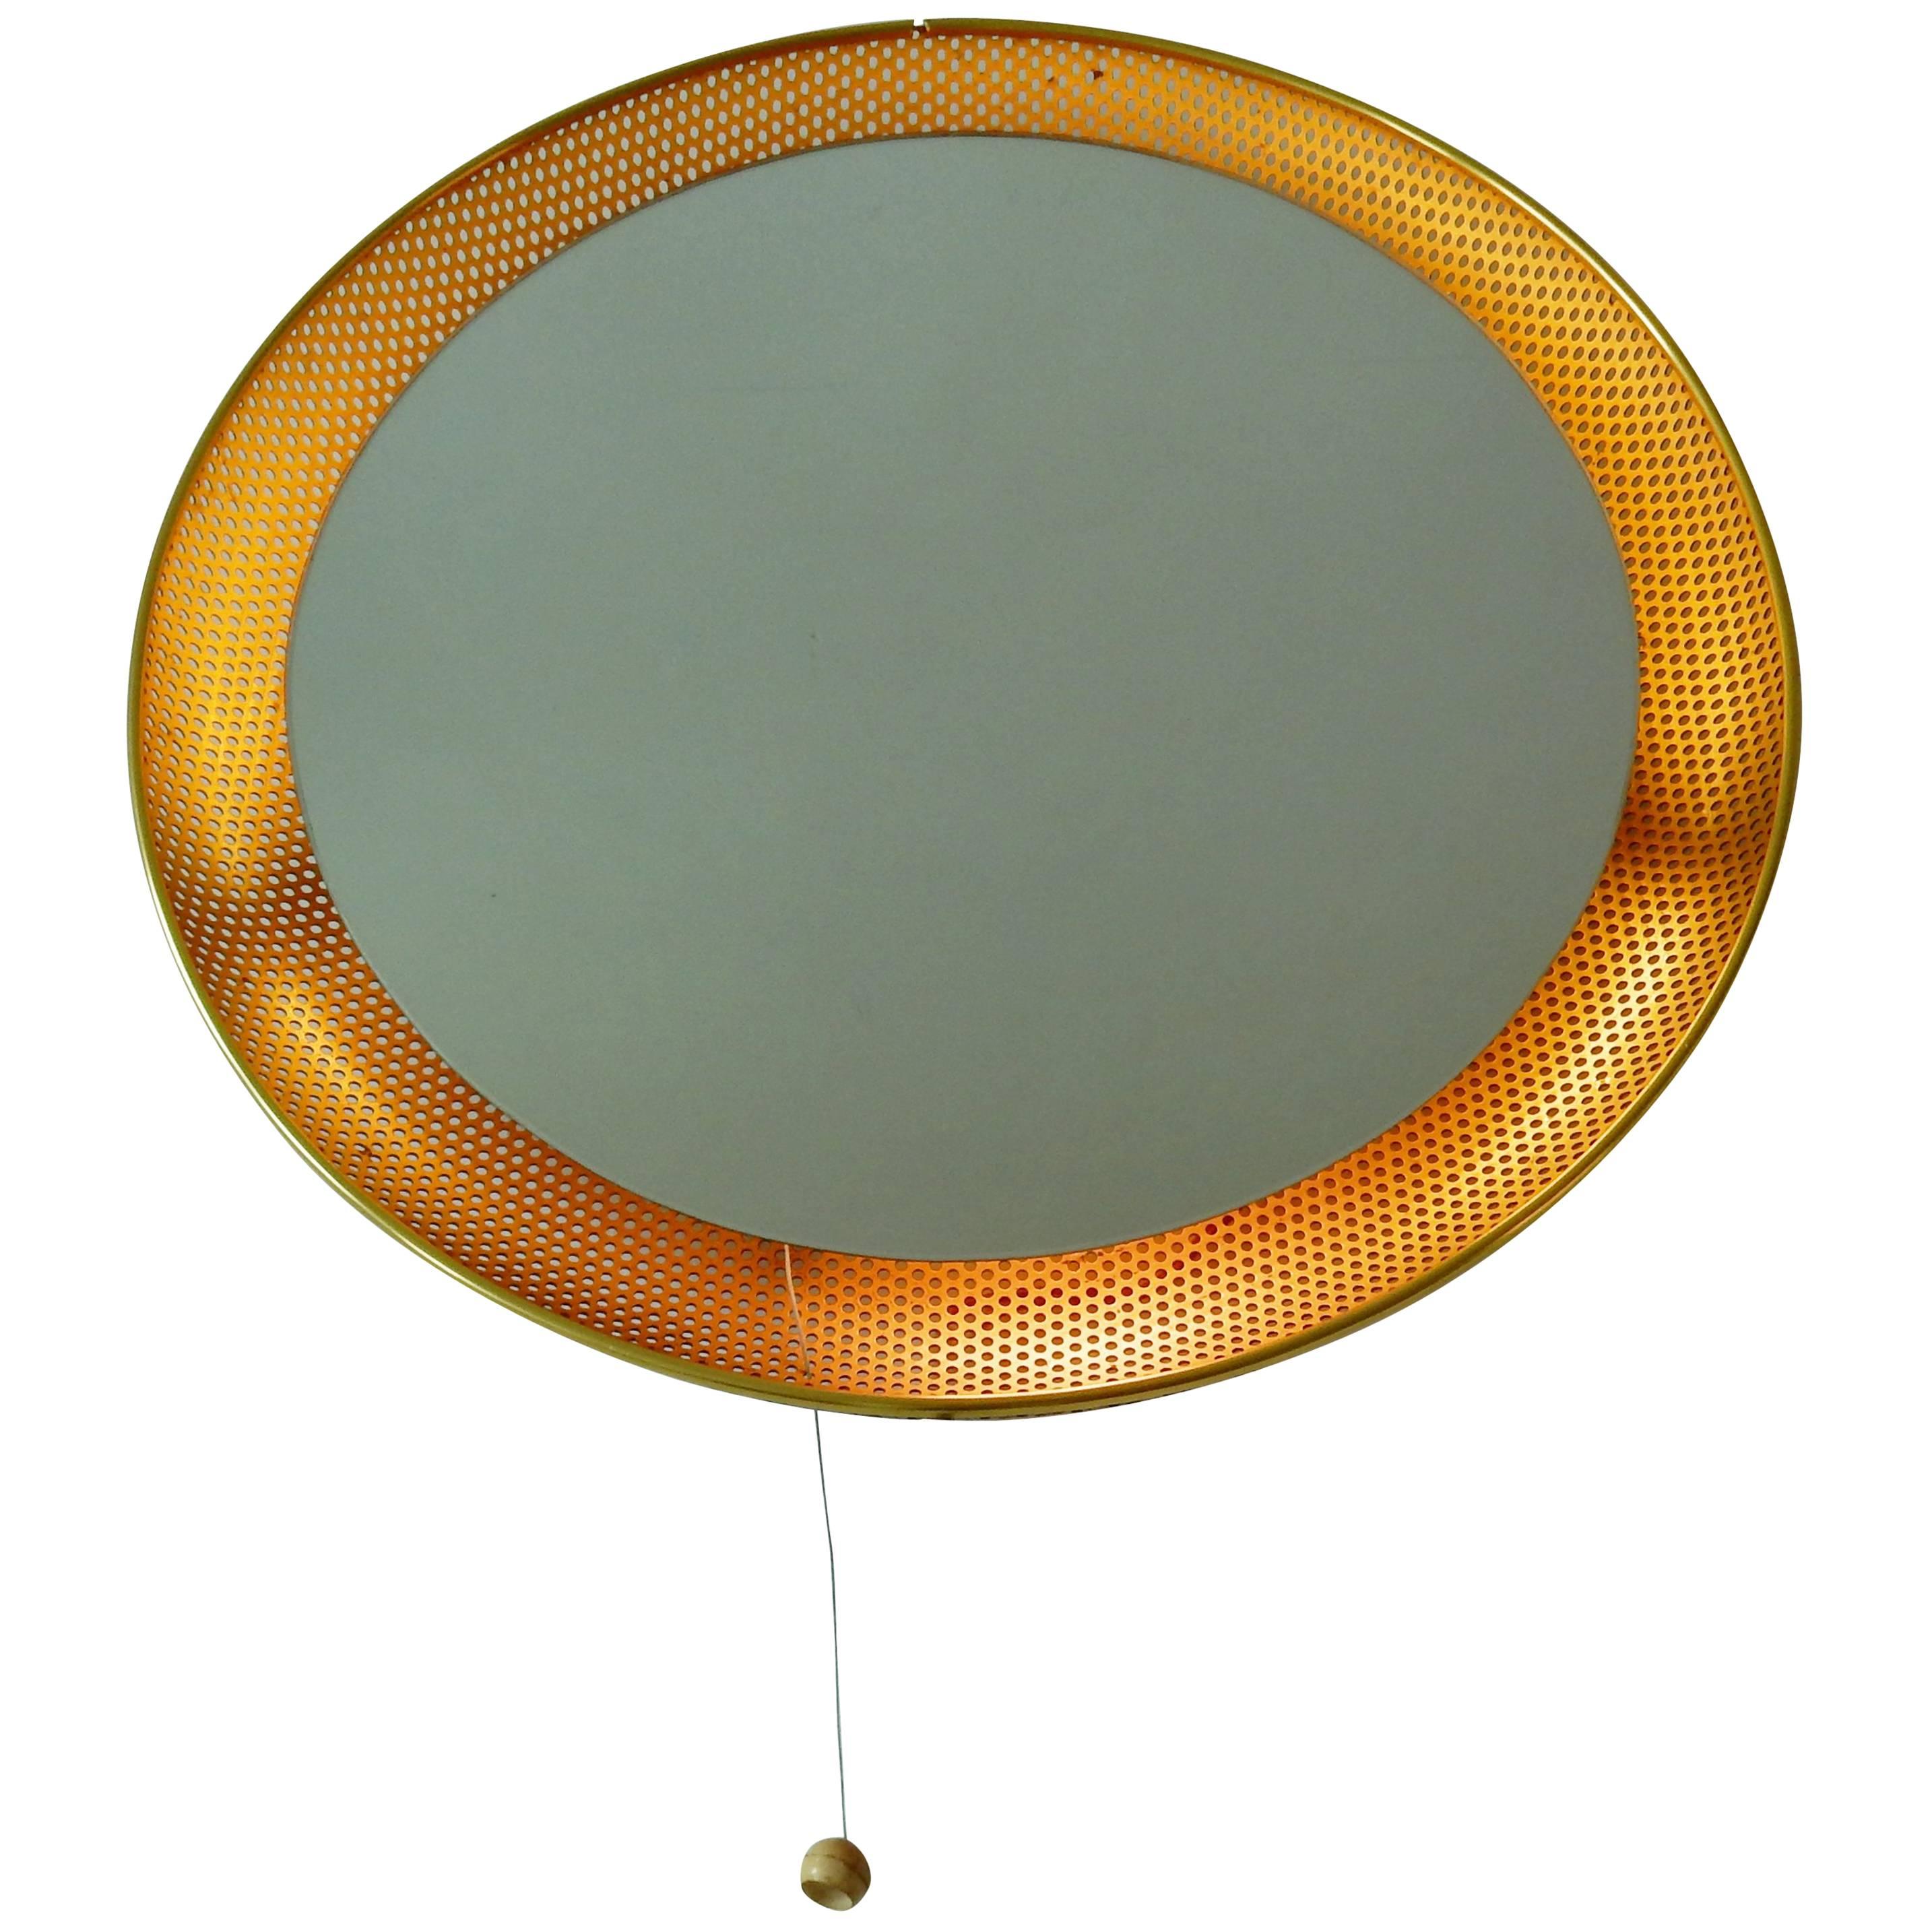 Luminated Mirror on a Perforated Frame, Netherlands, 1950s or 1960s